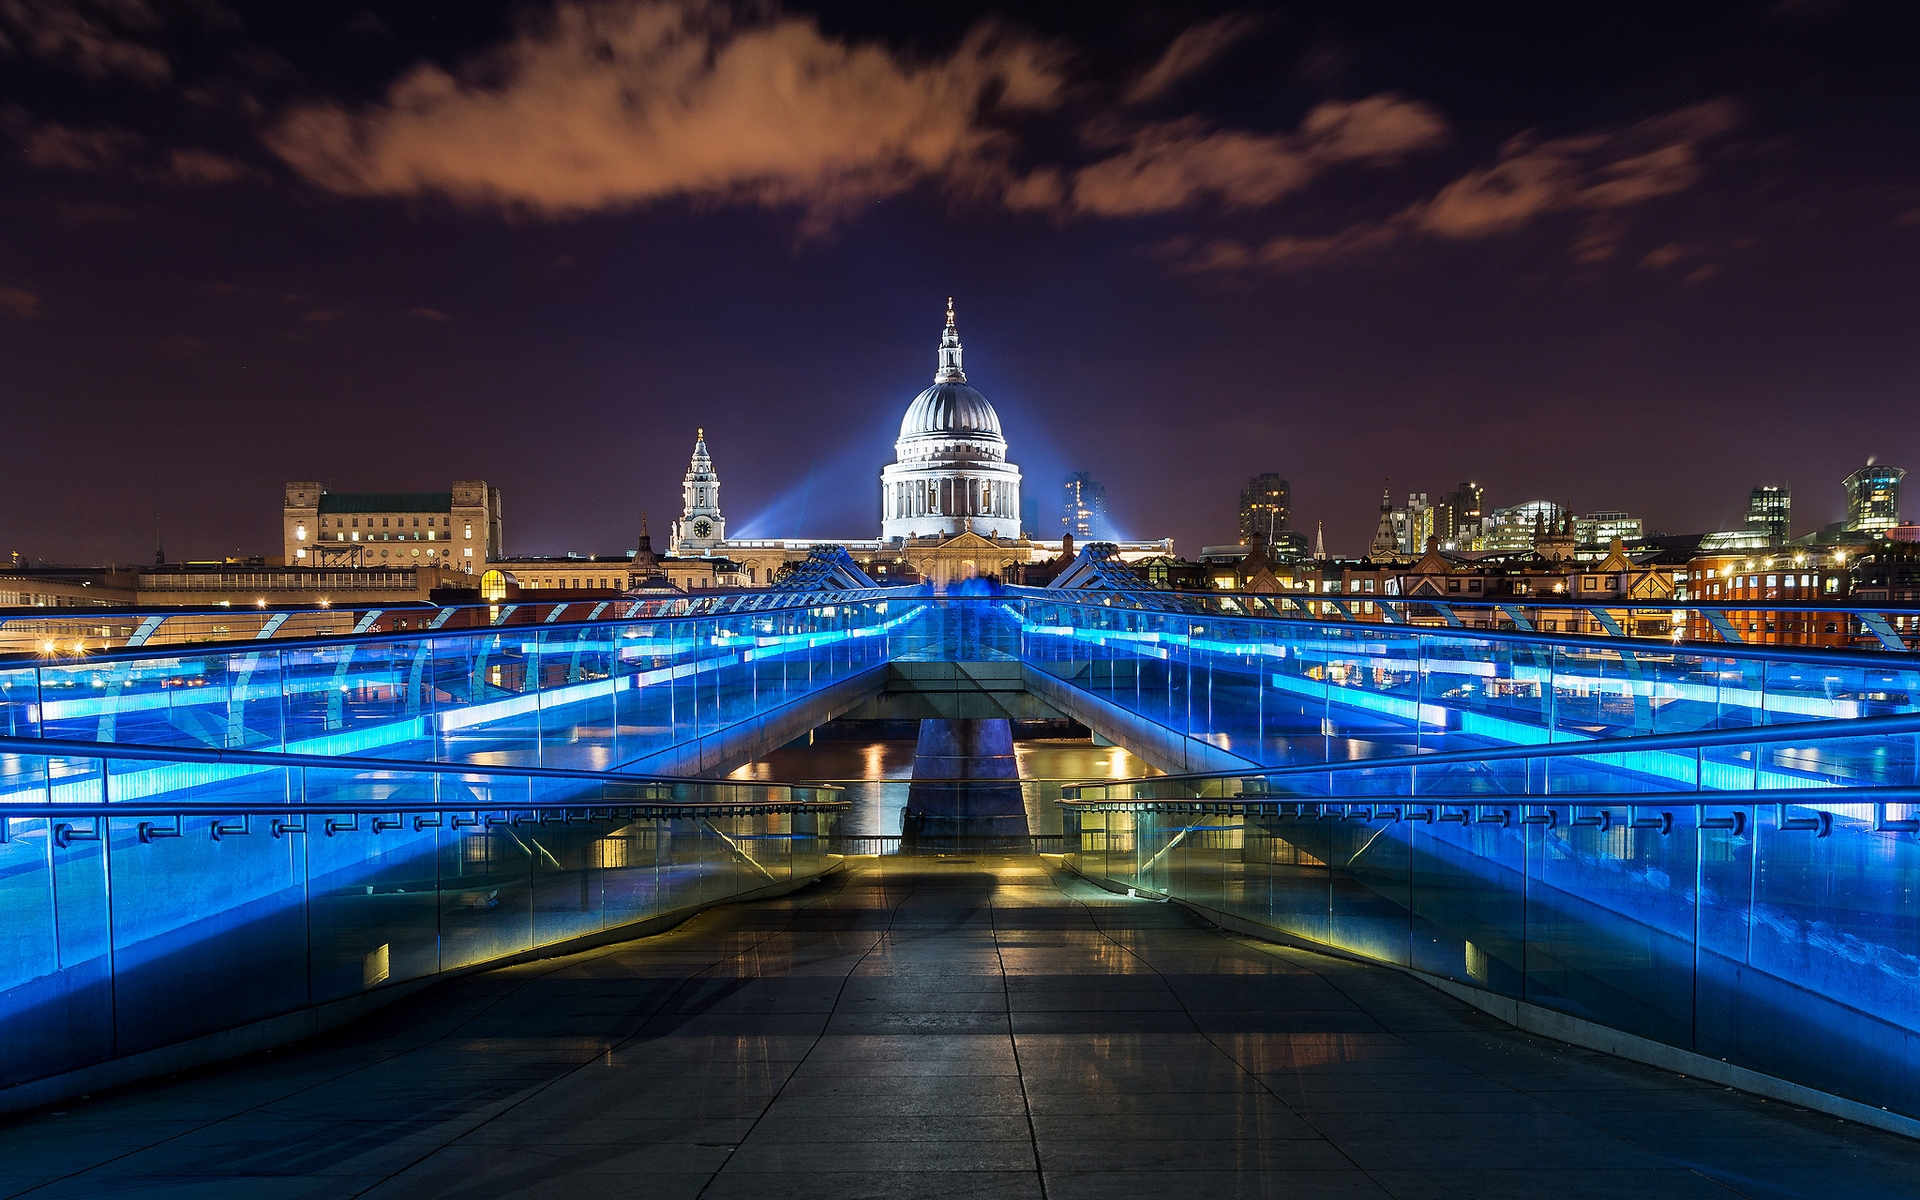 London at night wallpapers and images - wallpapers, pictures, photos